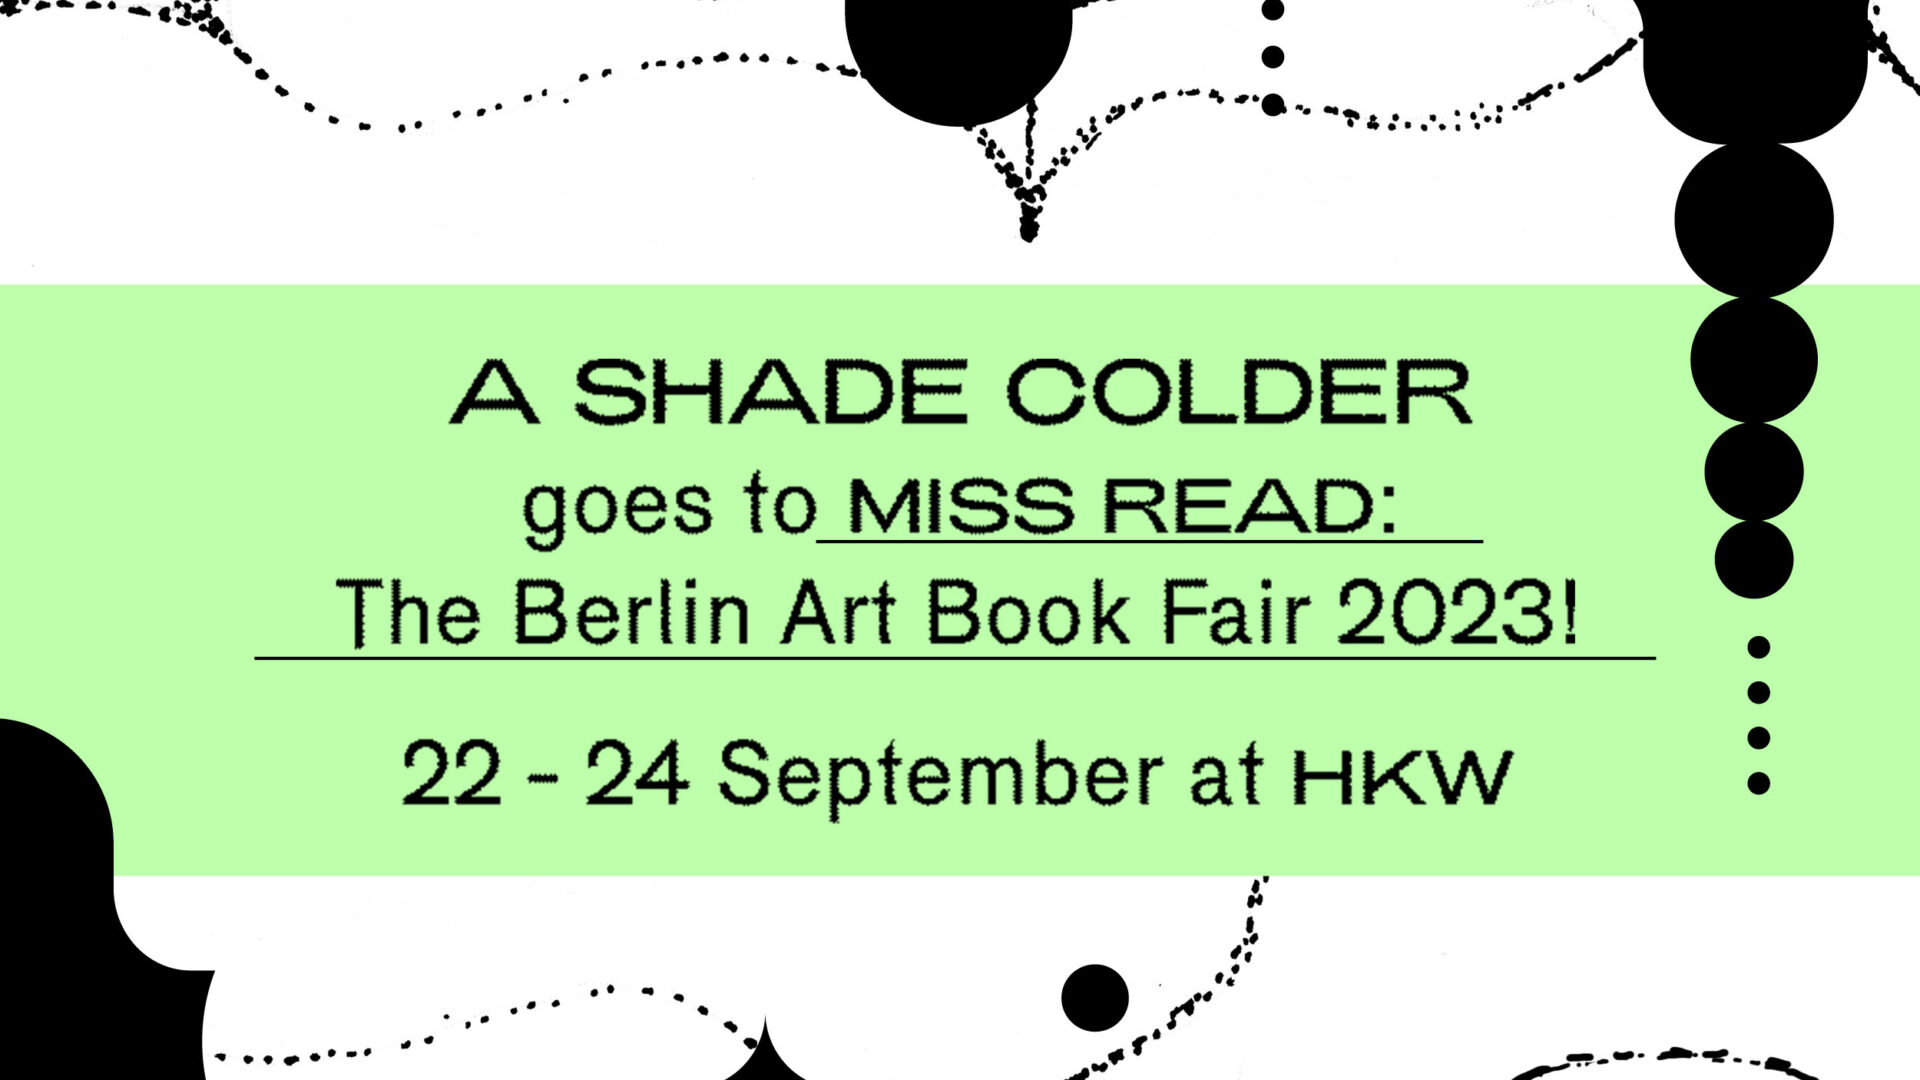 A Shade Colder goes to Miss Read